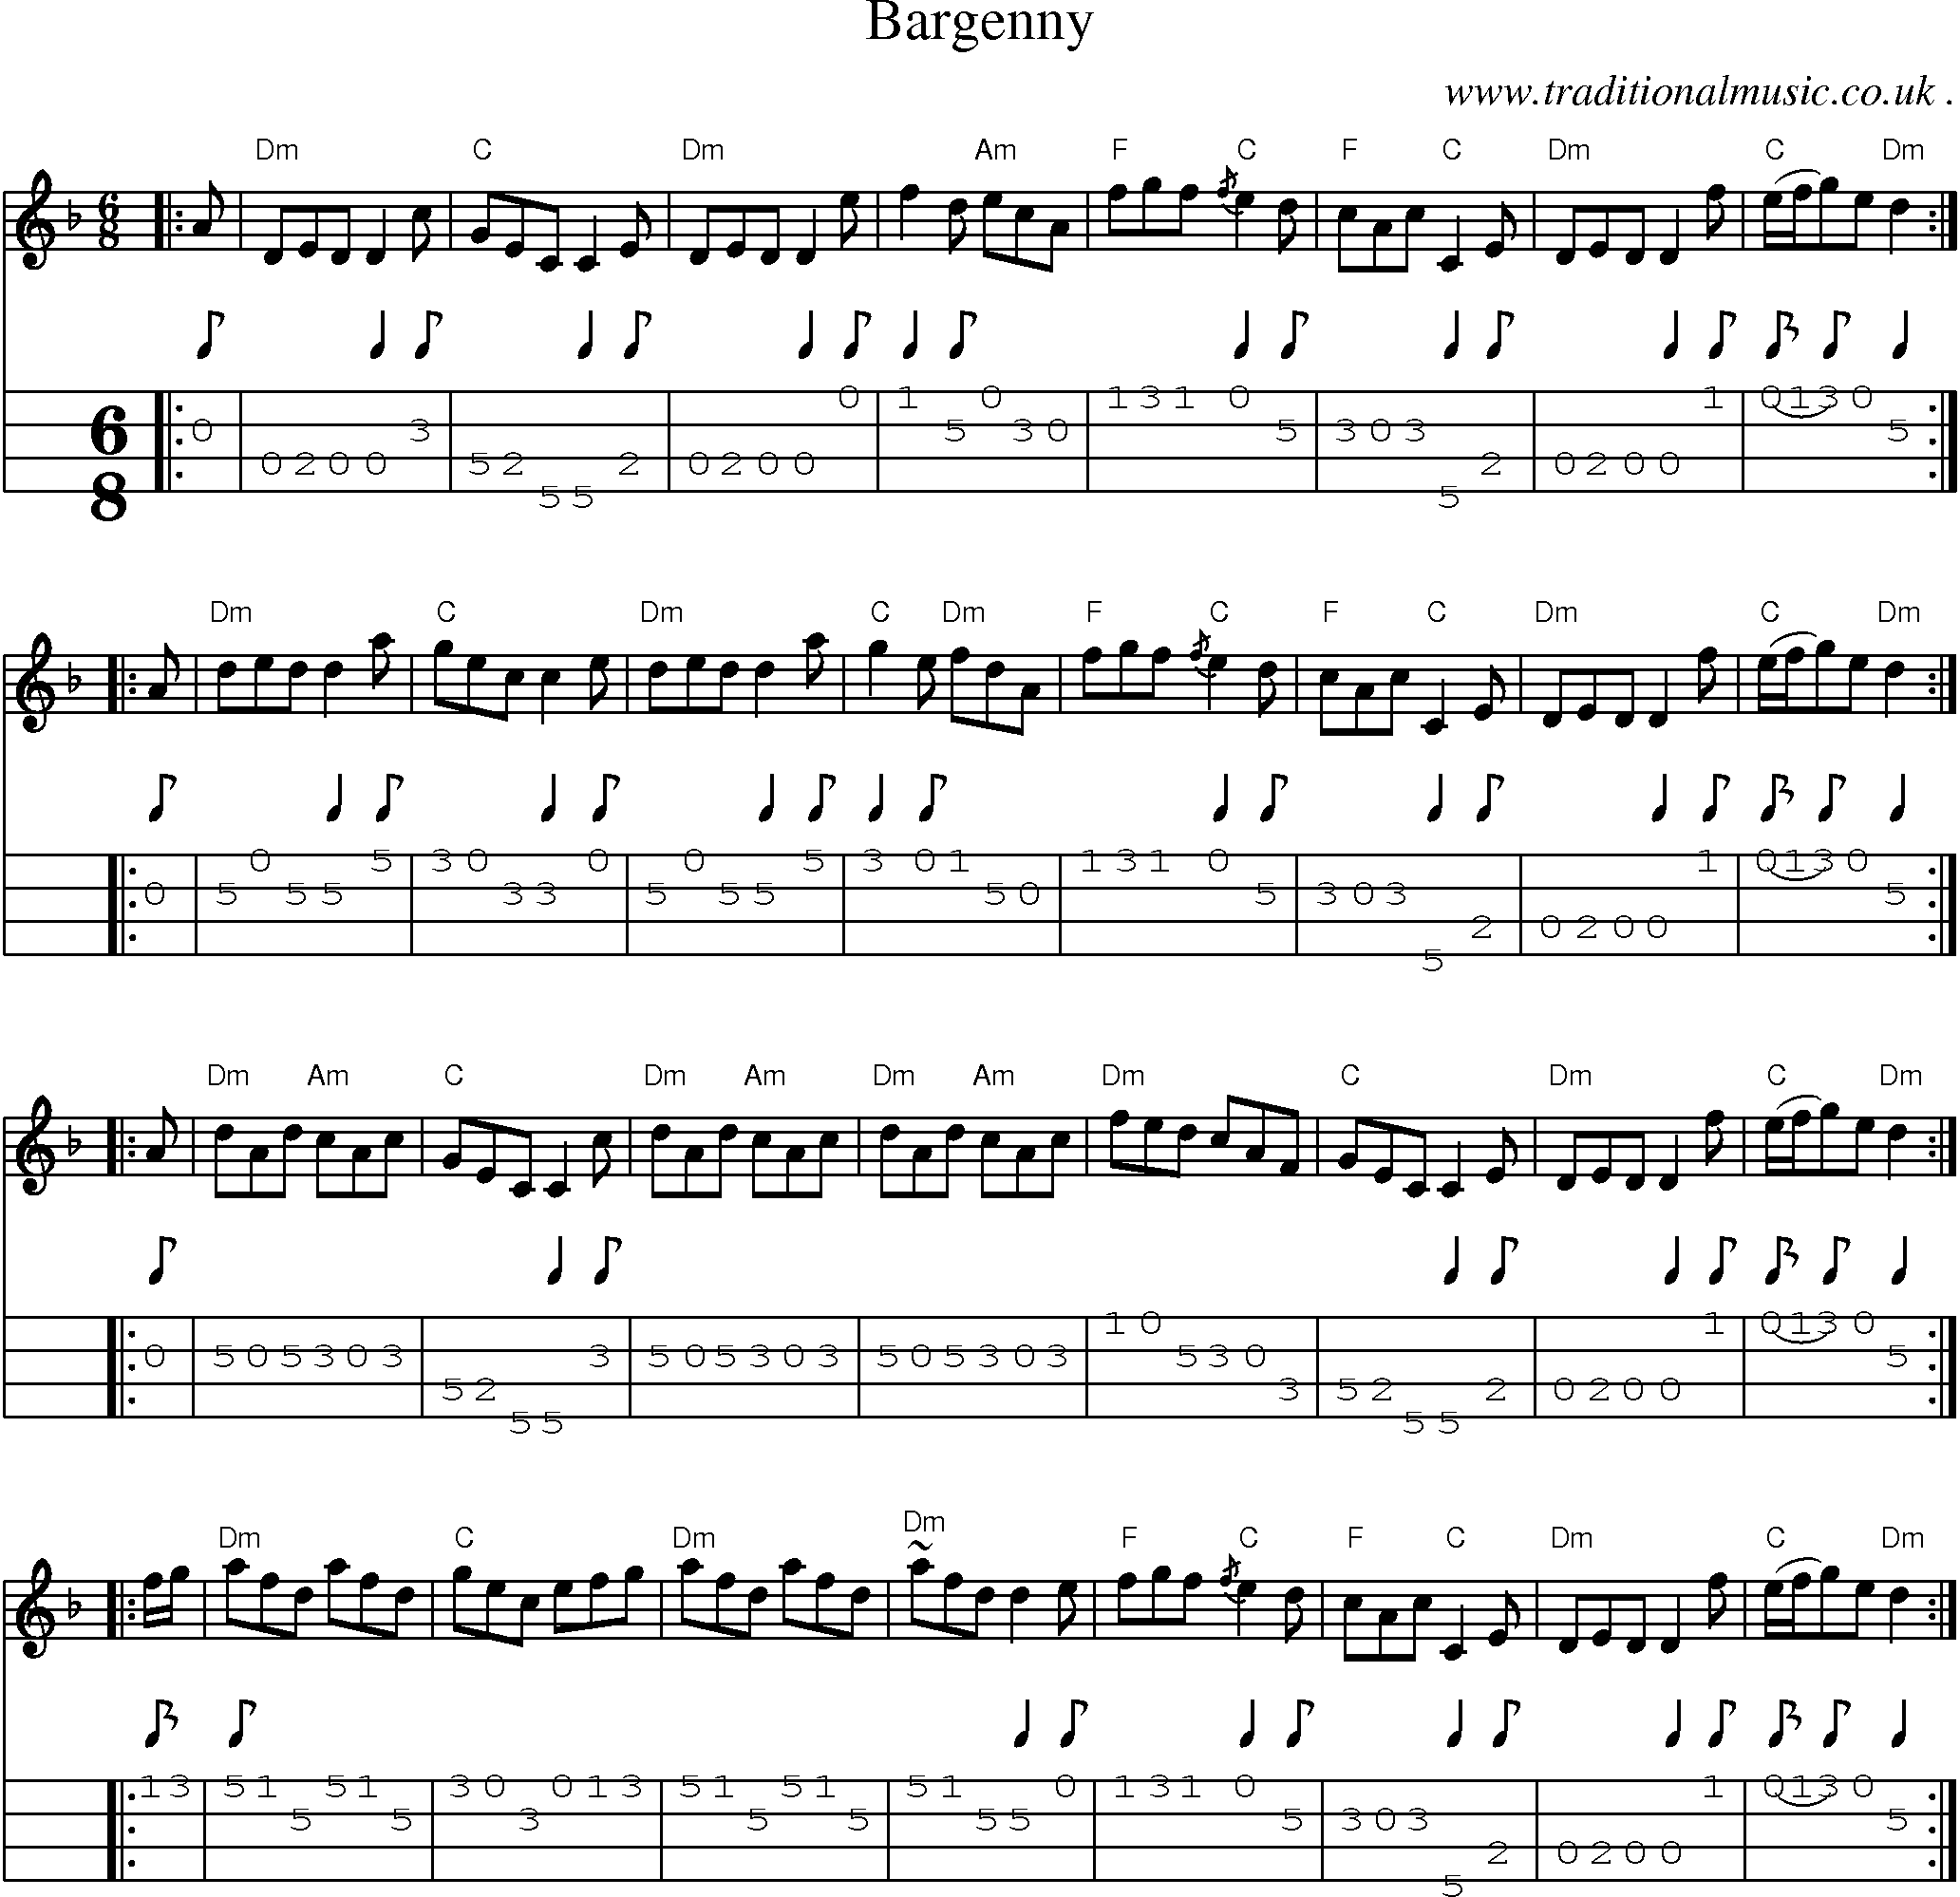 Sheet-music  score, Chords and Mandolin Tabs for Bargenny